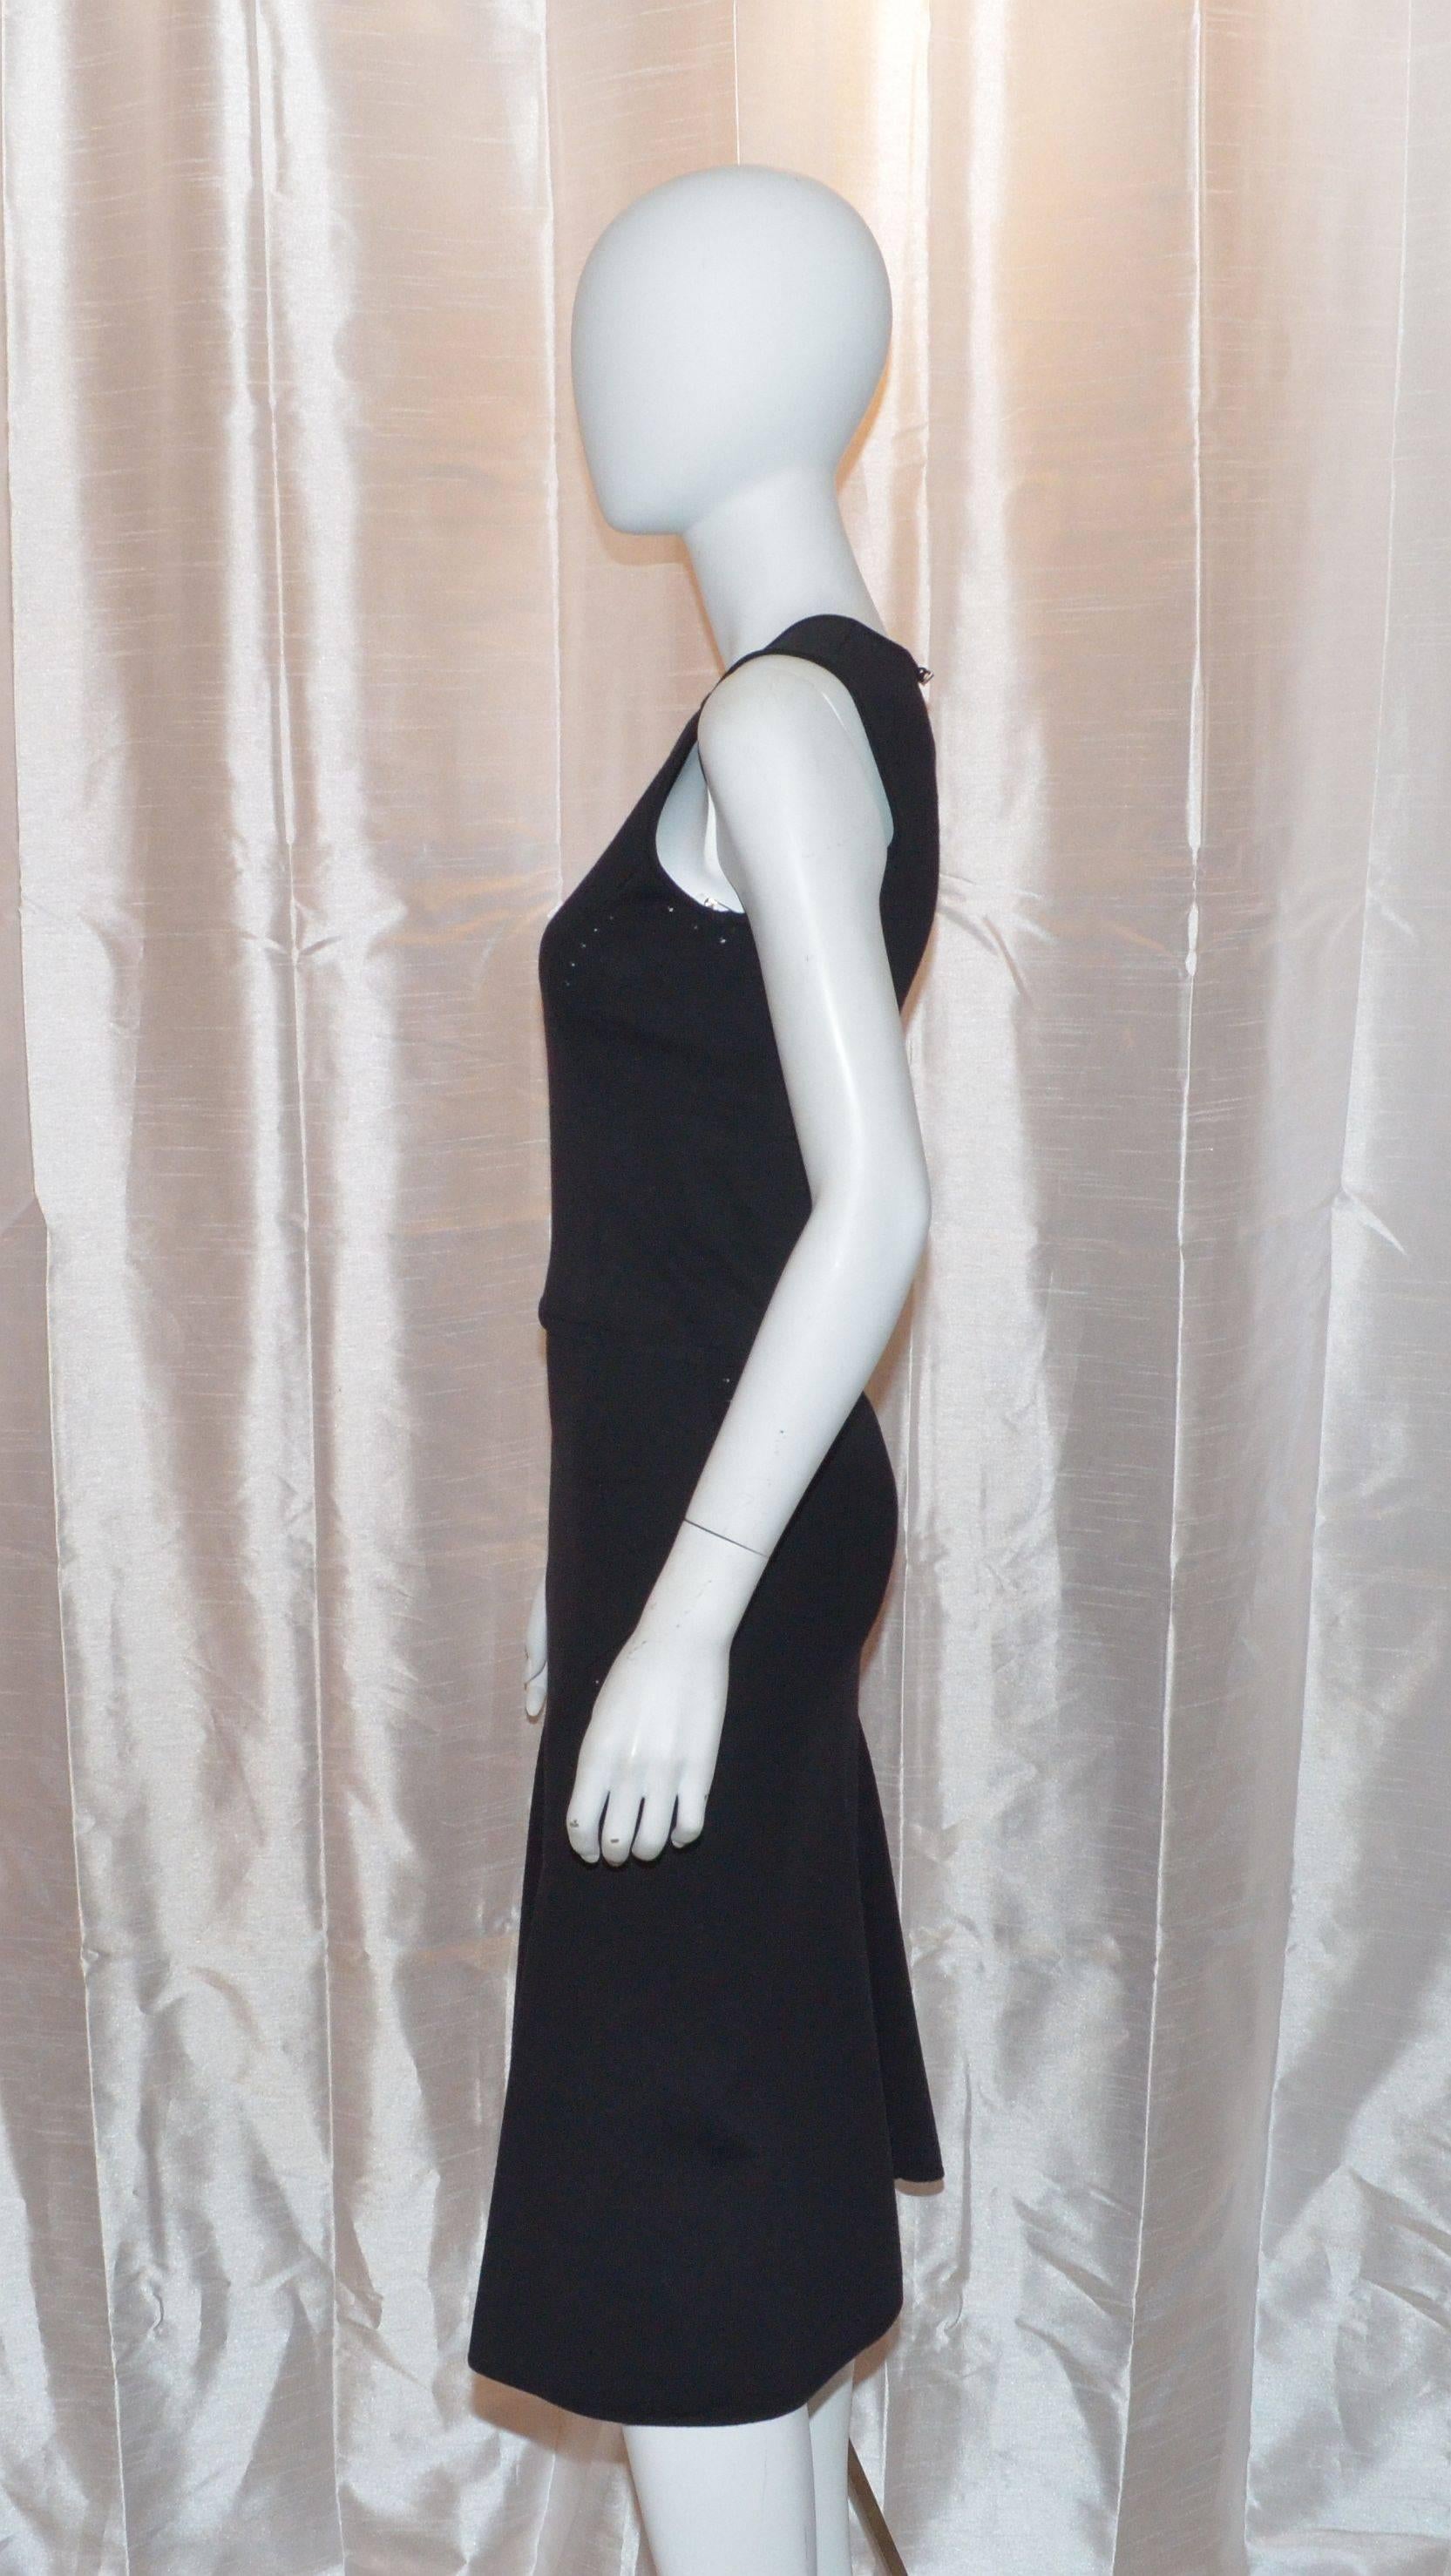 Gianni Versace Vintage Black Wool Knit Cropped Tank and Midi Skirt Ensemble Set

Gianni Versace skirt set features a body con knit shell and skirt. Shell has a button closure at the back of the neck. Skirt is stretchy with an elasticized waistband